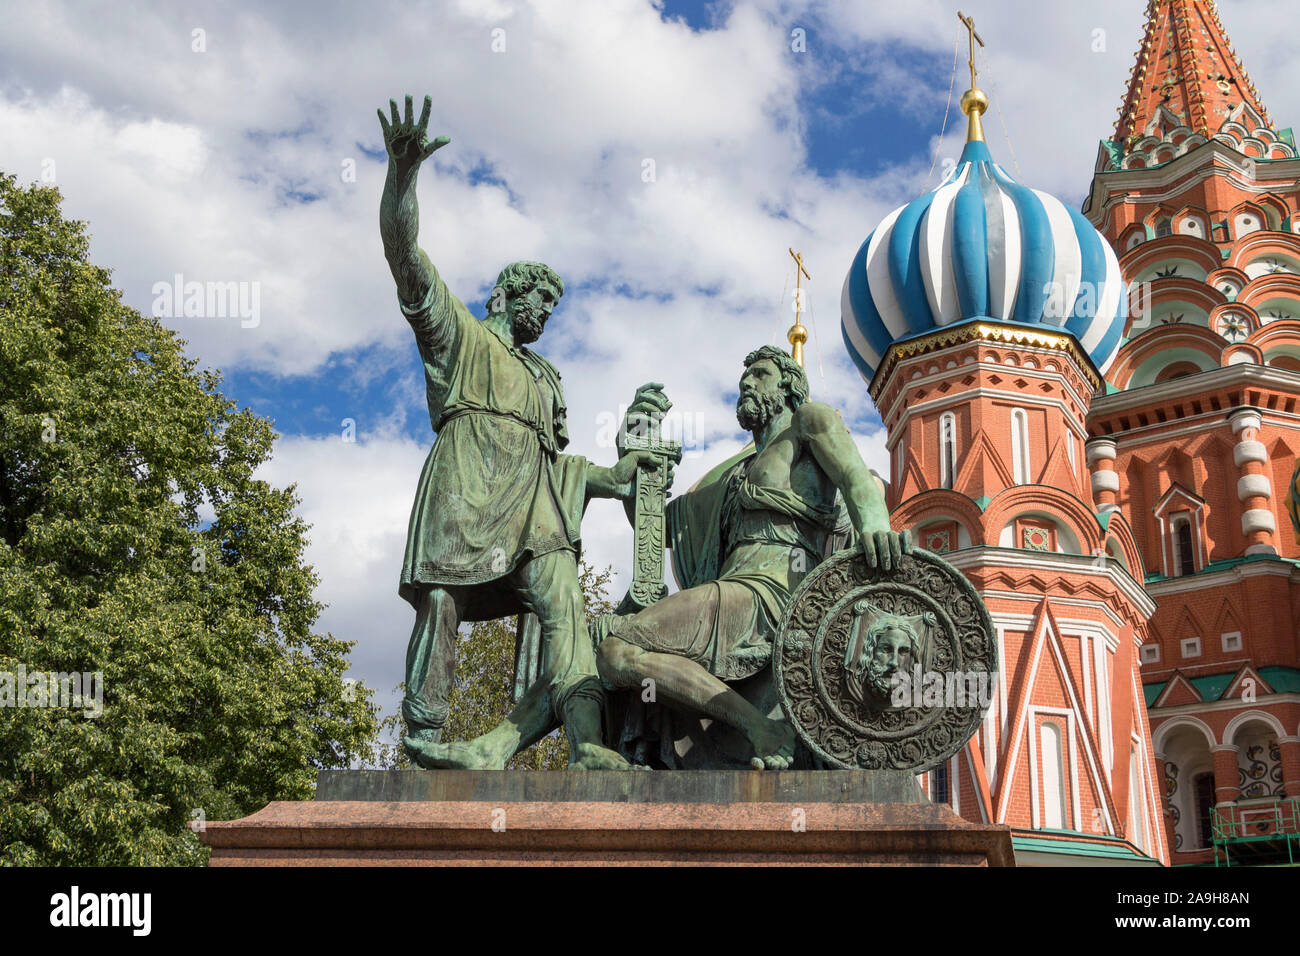 Moscow, Russia - July 7, 2019: Monument to Minin and Pozharsky next the Cathedral of Vasily Blessed on a summer day Stock Photo